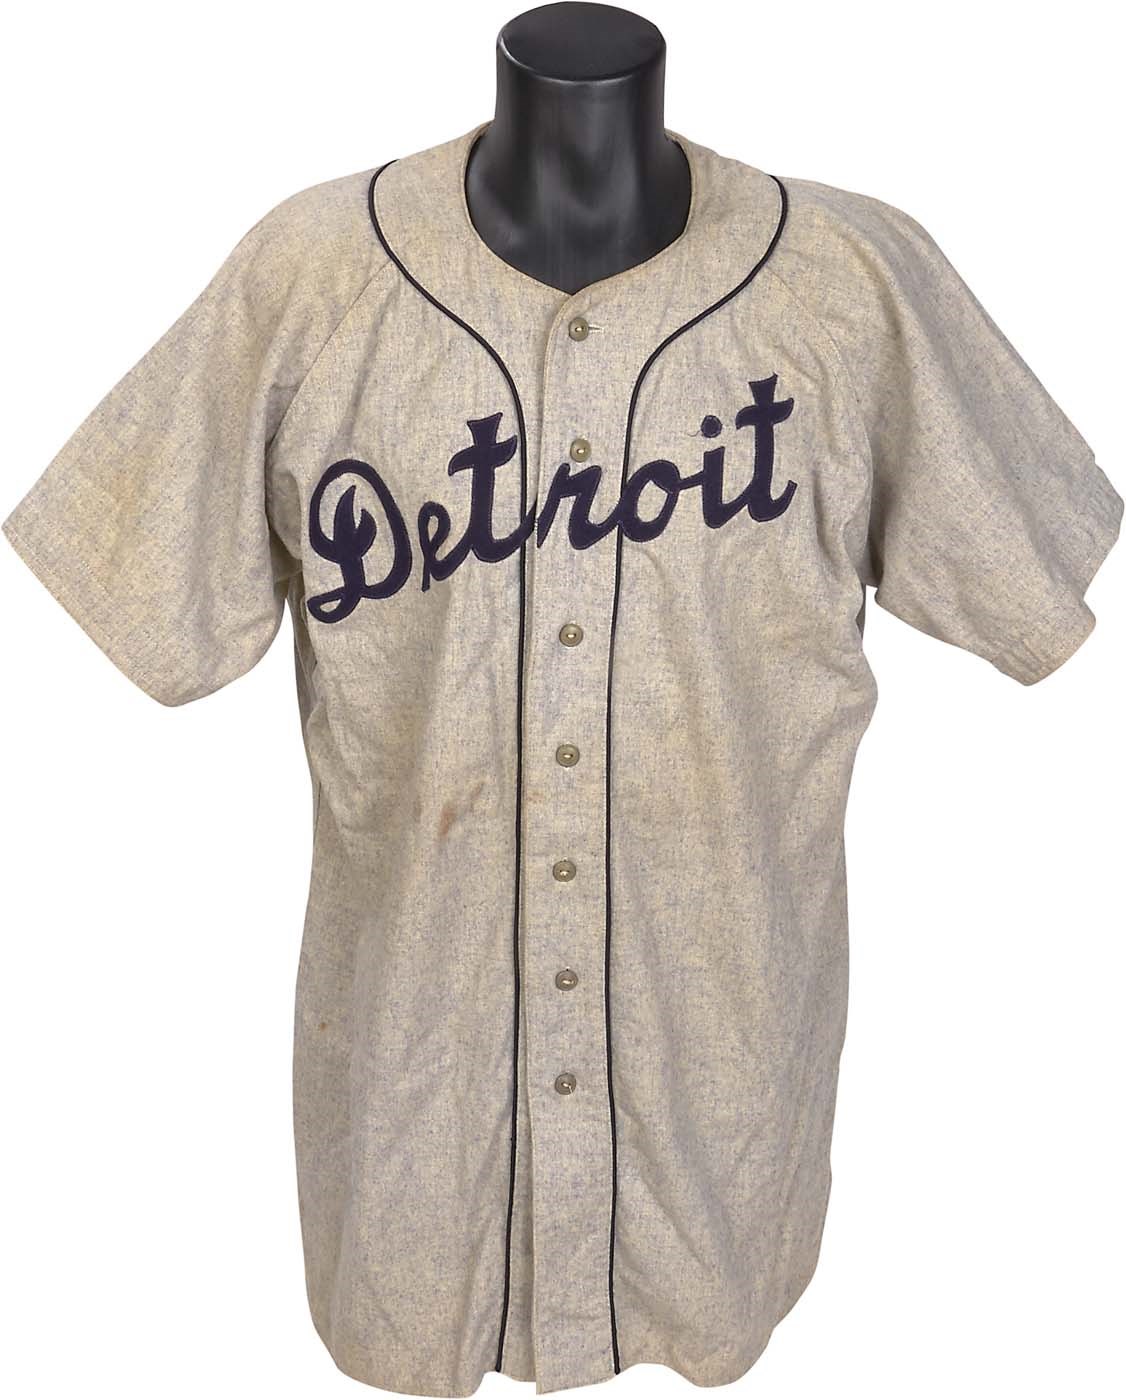 Ty Cobb and Detroit Tigers - Circa 1950 Bob Swift Detroit Tigers Game Worn Jersey